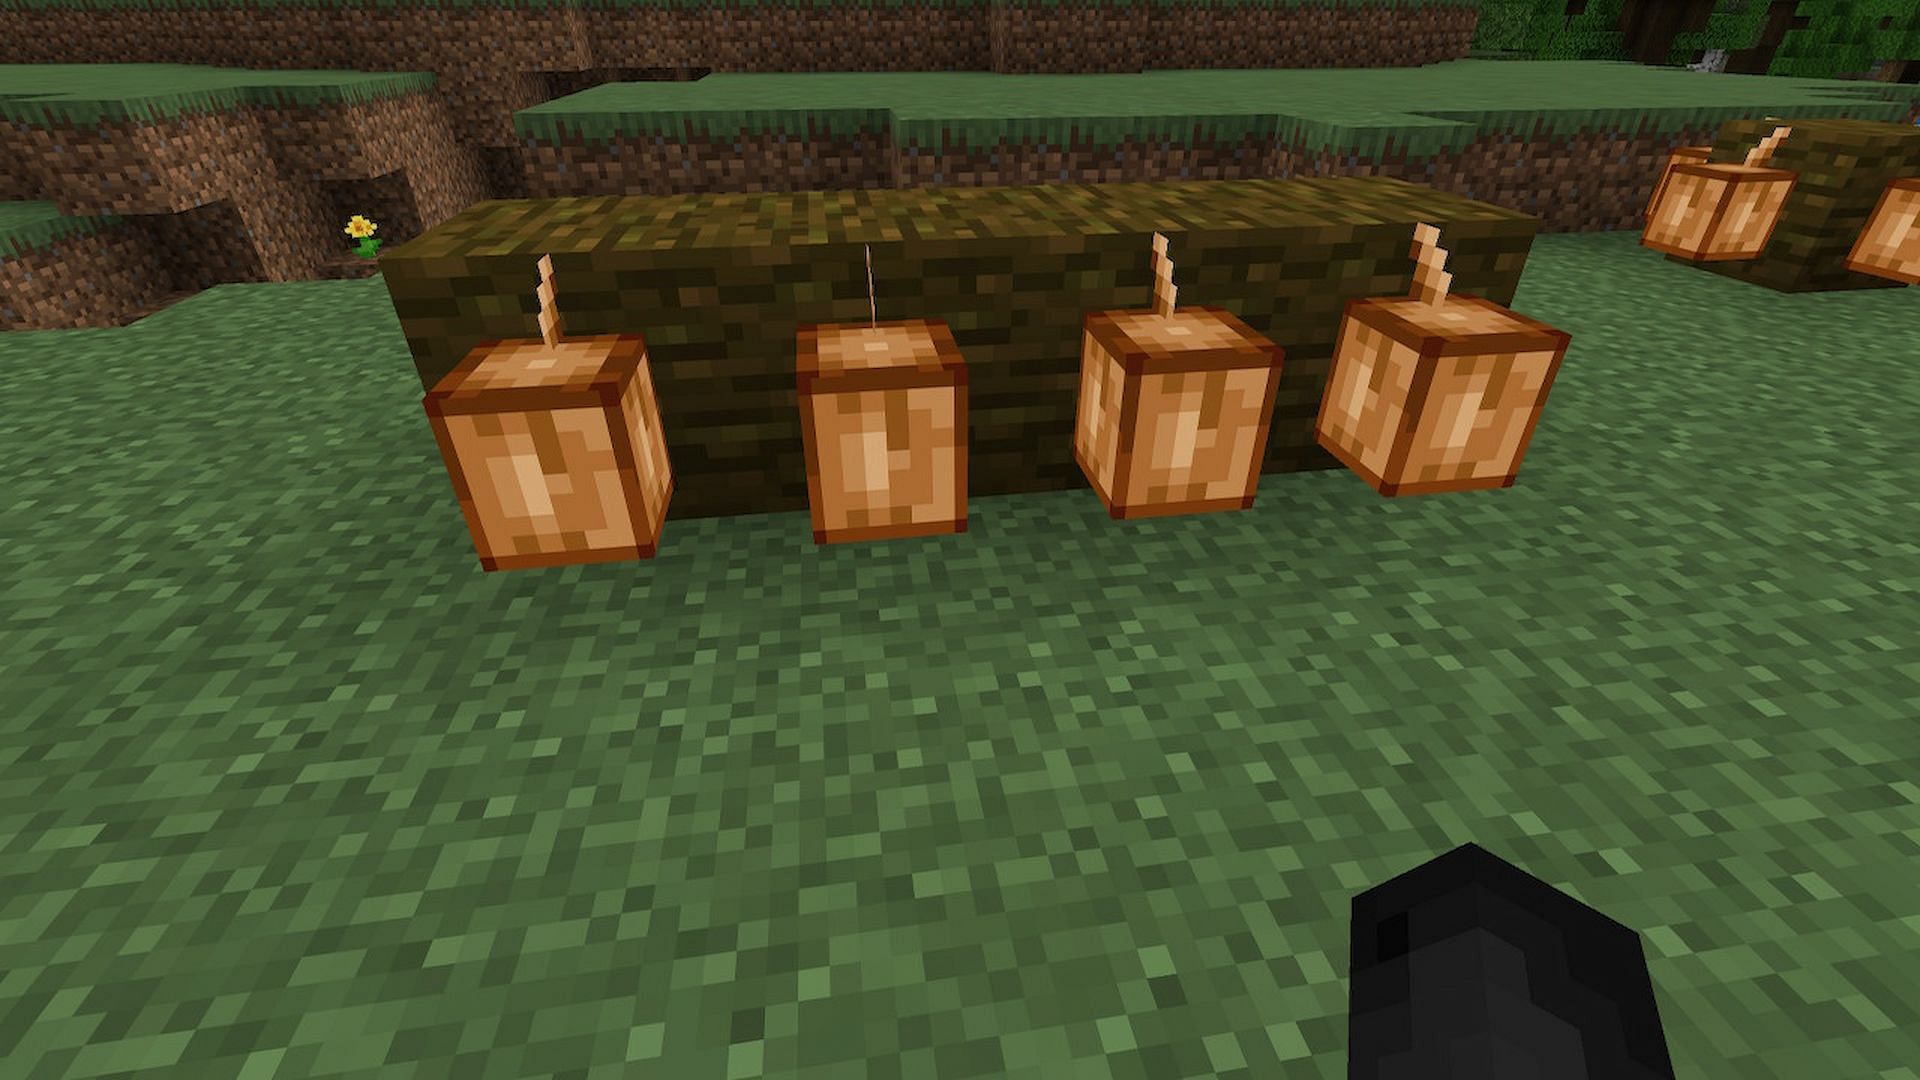 Players can grow cocoa pods very easily and have a cocoa bean farm (Image via Minecraft)